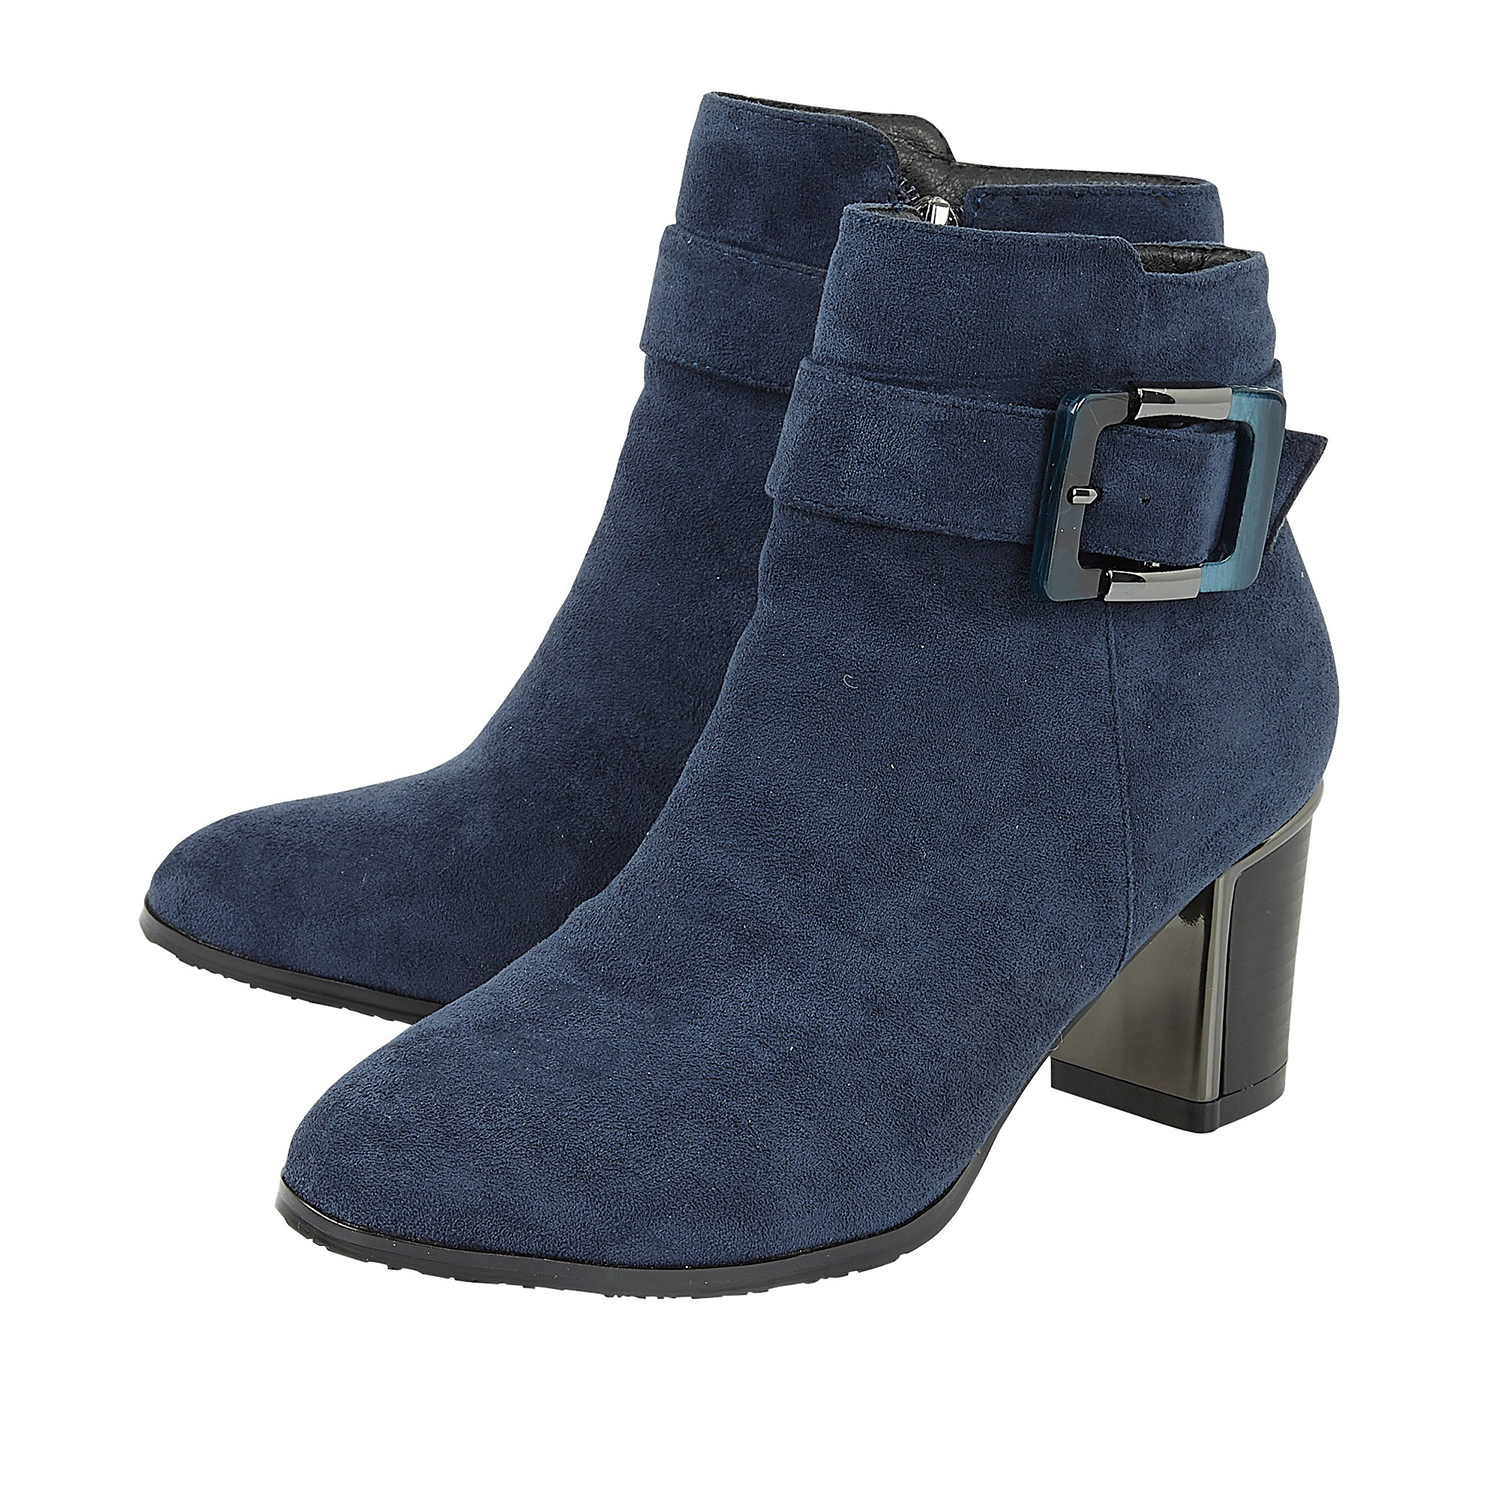 Lotus CHARLOTTE Heeled Ankled Boots with Buckle (Size 7) - Navy